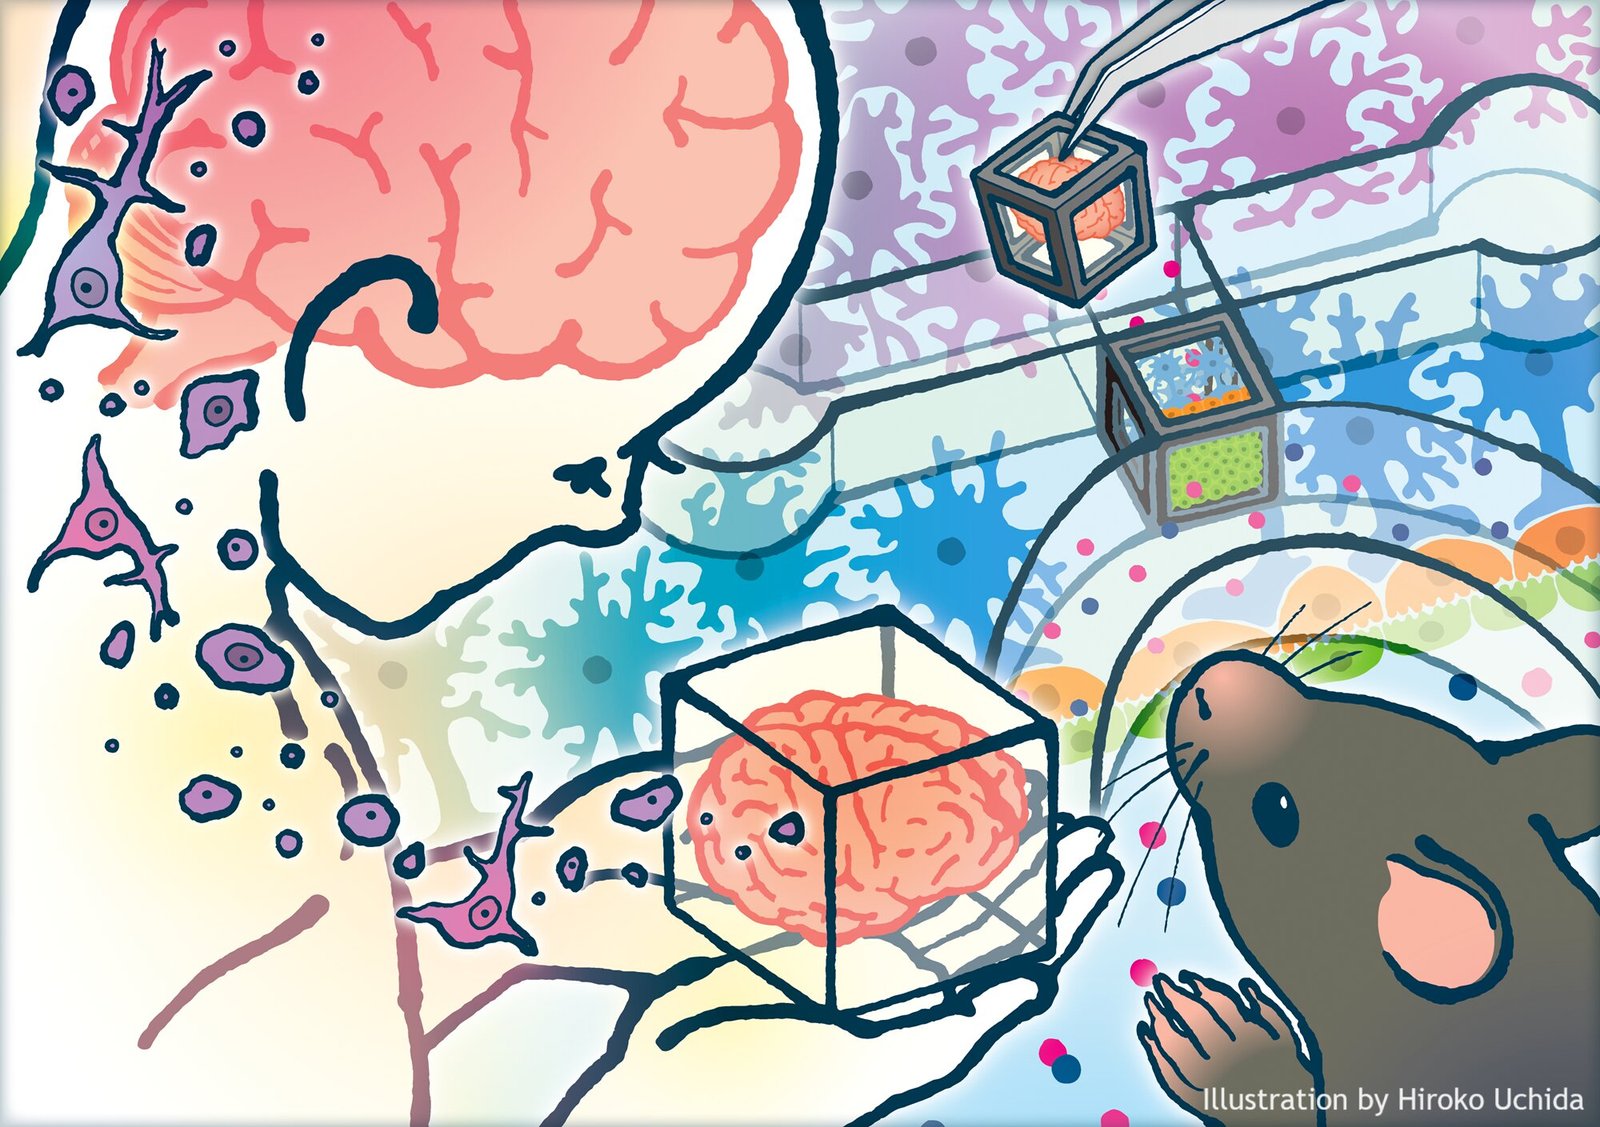 Researchers model blood-brain barrier using ‘Tissue-in-a-CUBE’ system